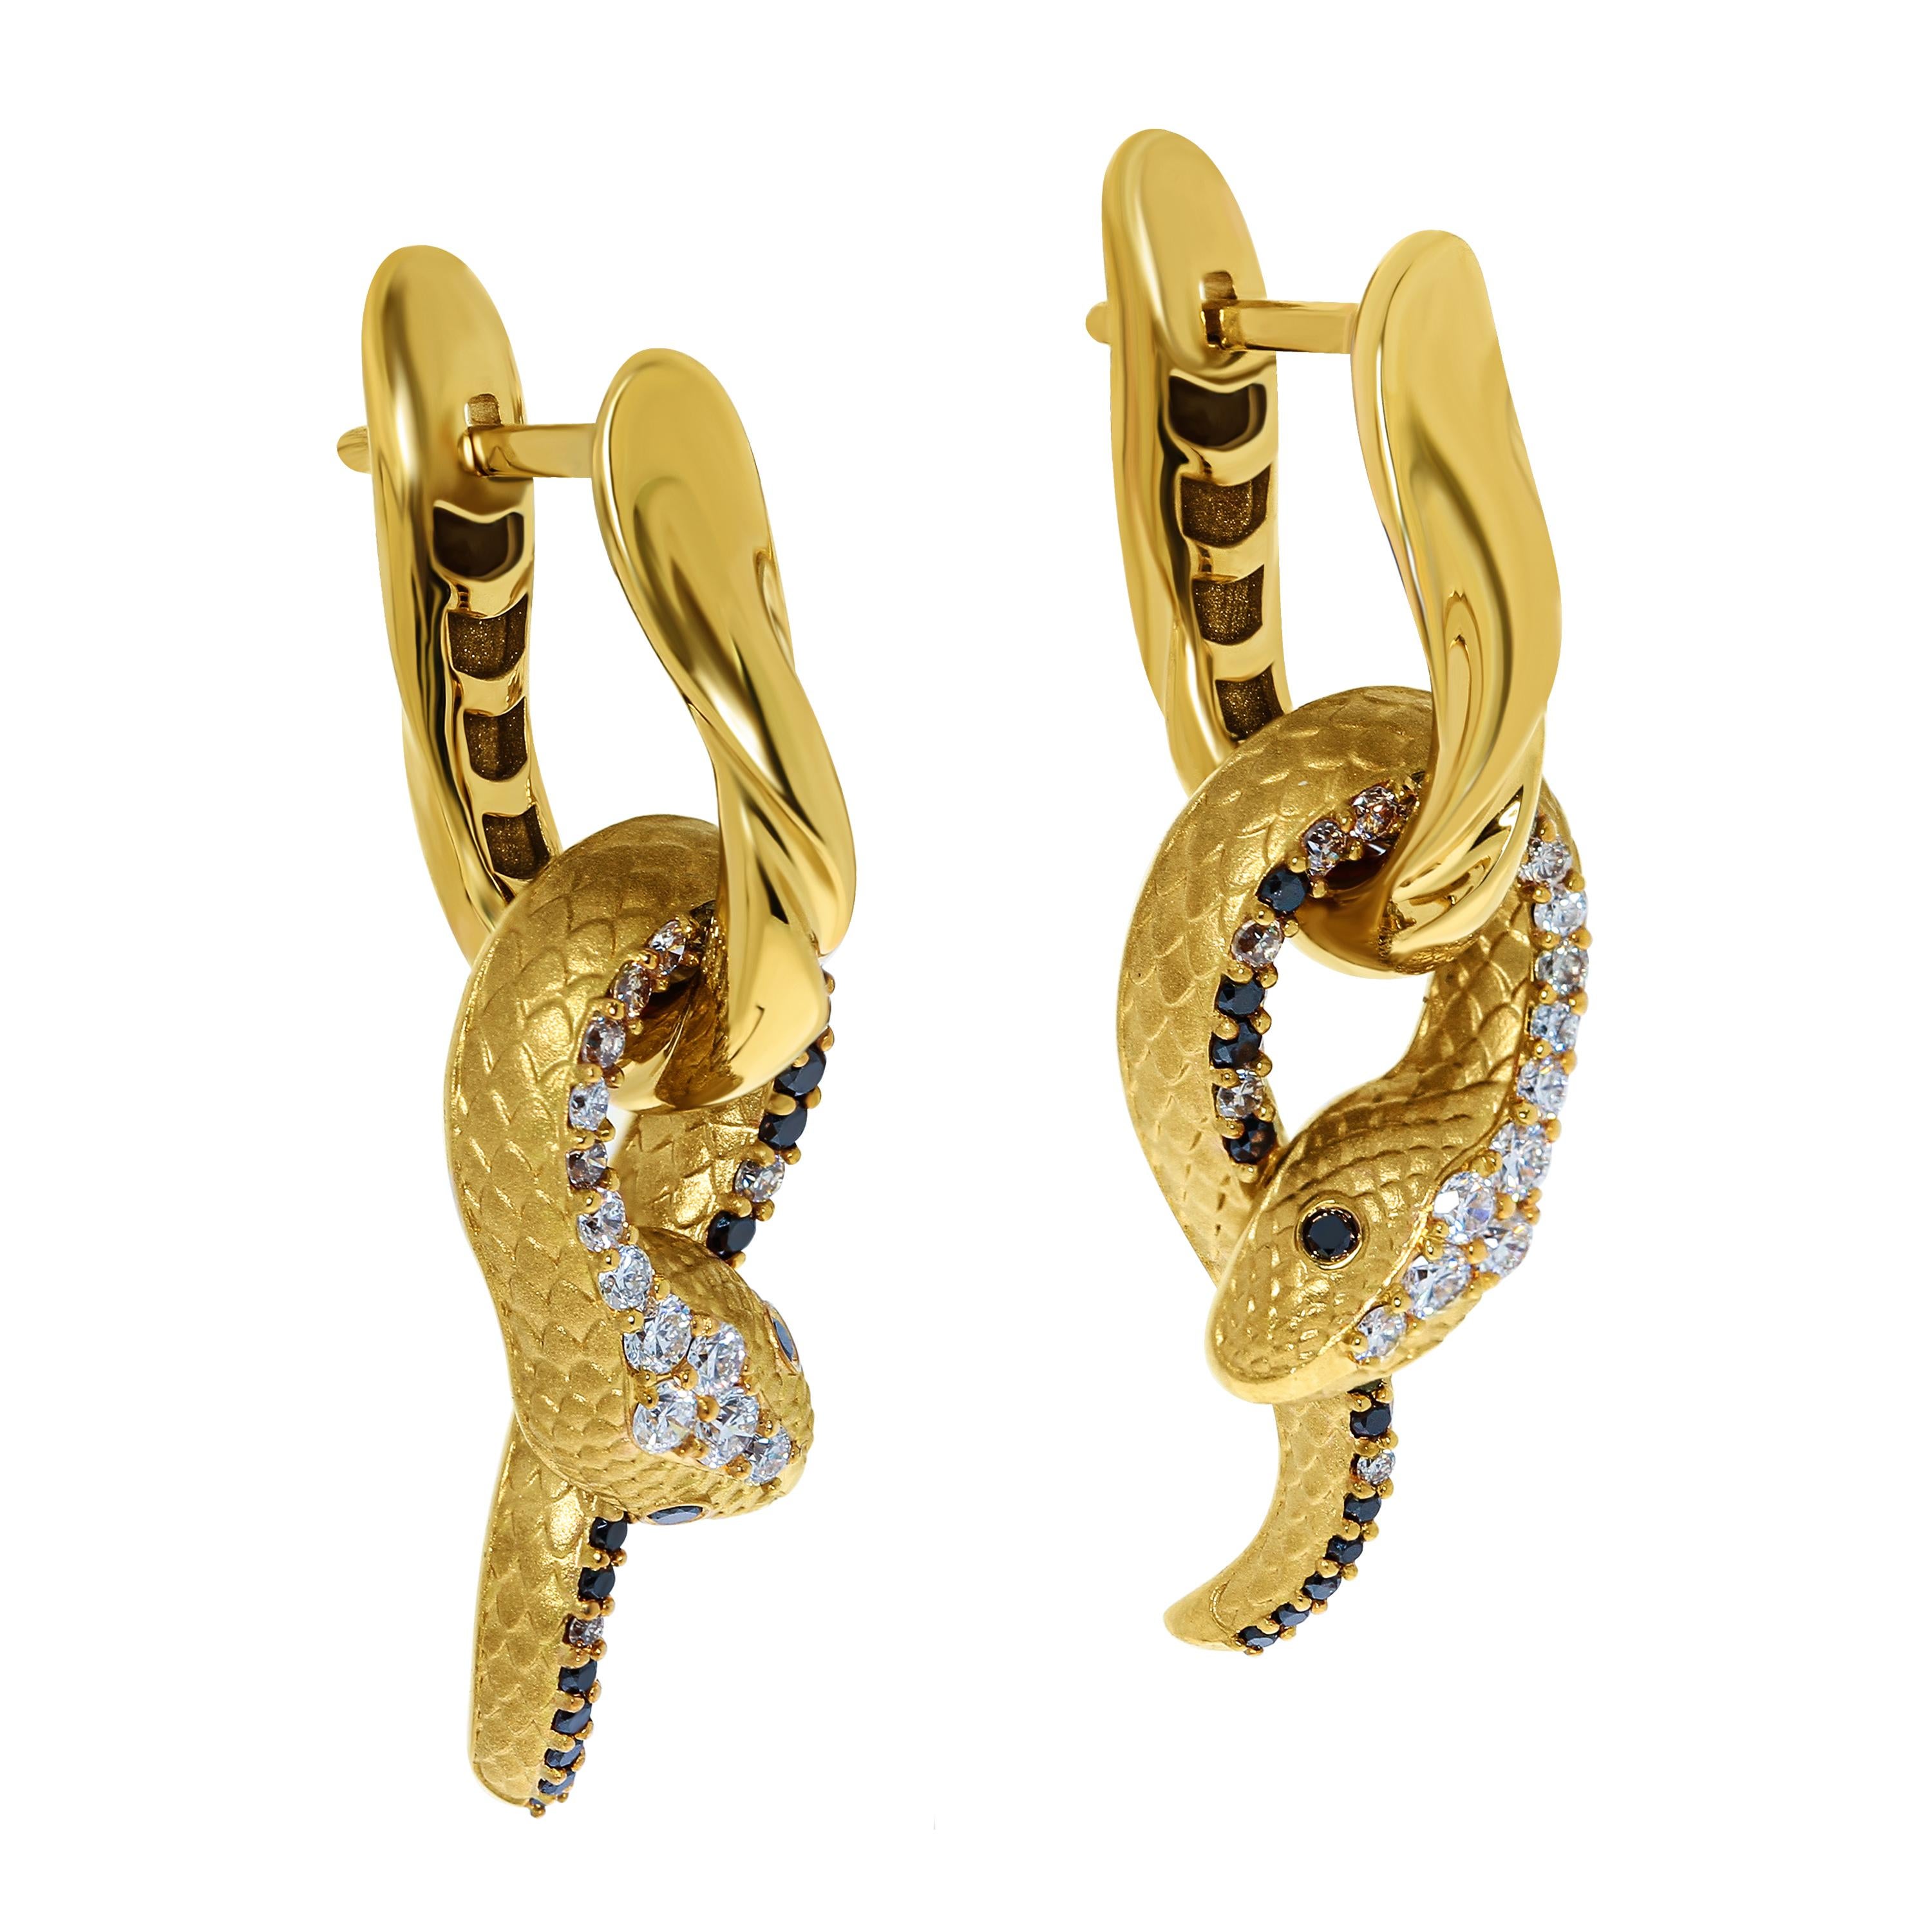 White, Champagne and Black Diamonds 18 Karat Yellow Gold Snake Earrings
The Snake is the first to be met by the Little Prince from St. Exupery's 